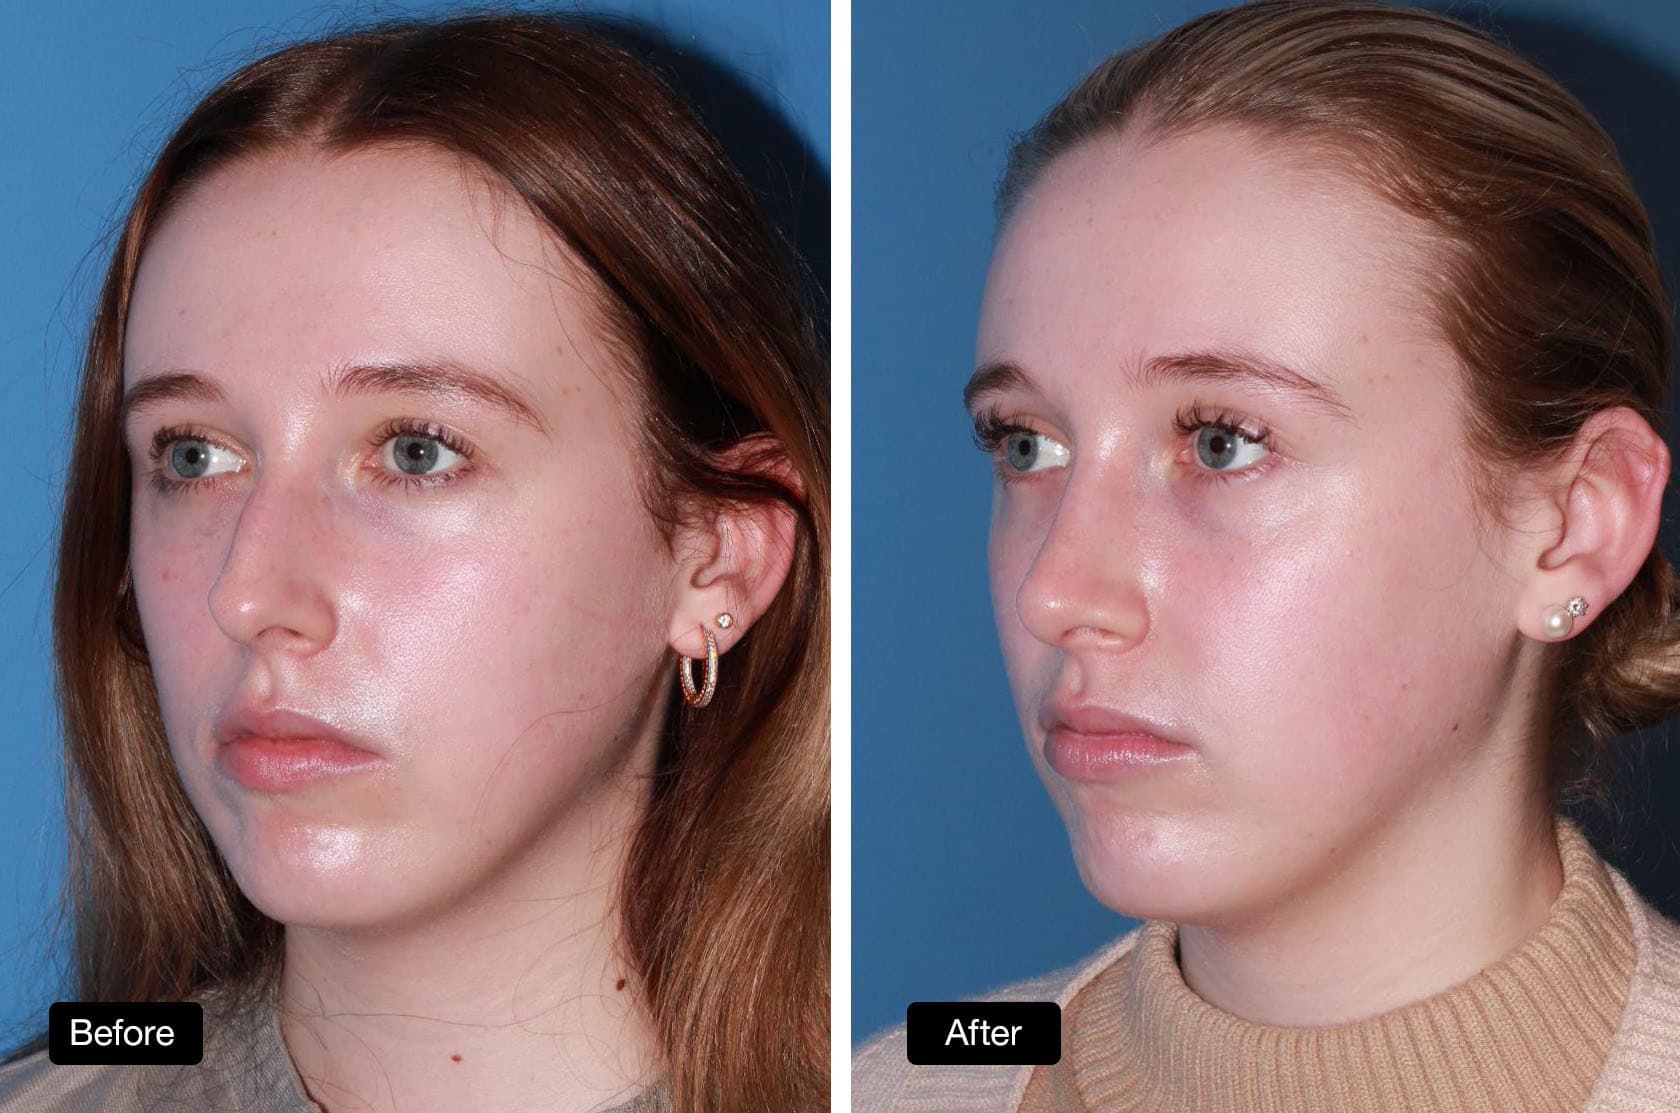 Rhinoplasty - Patient Before and After: 23 year old patient with dorsal reduction and tip refinement (2)